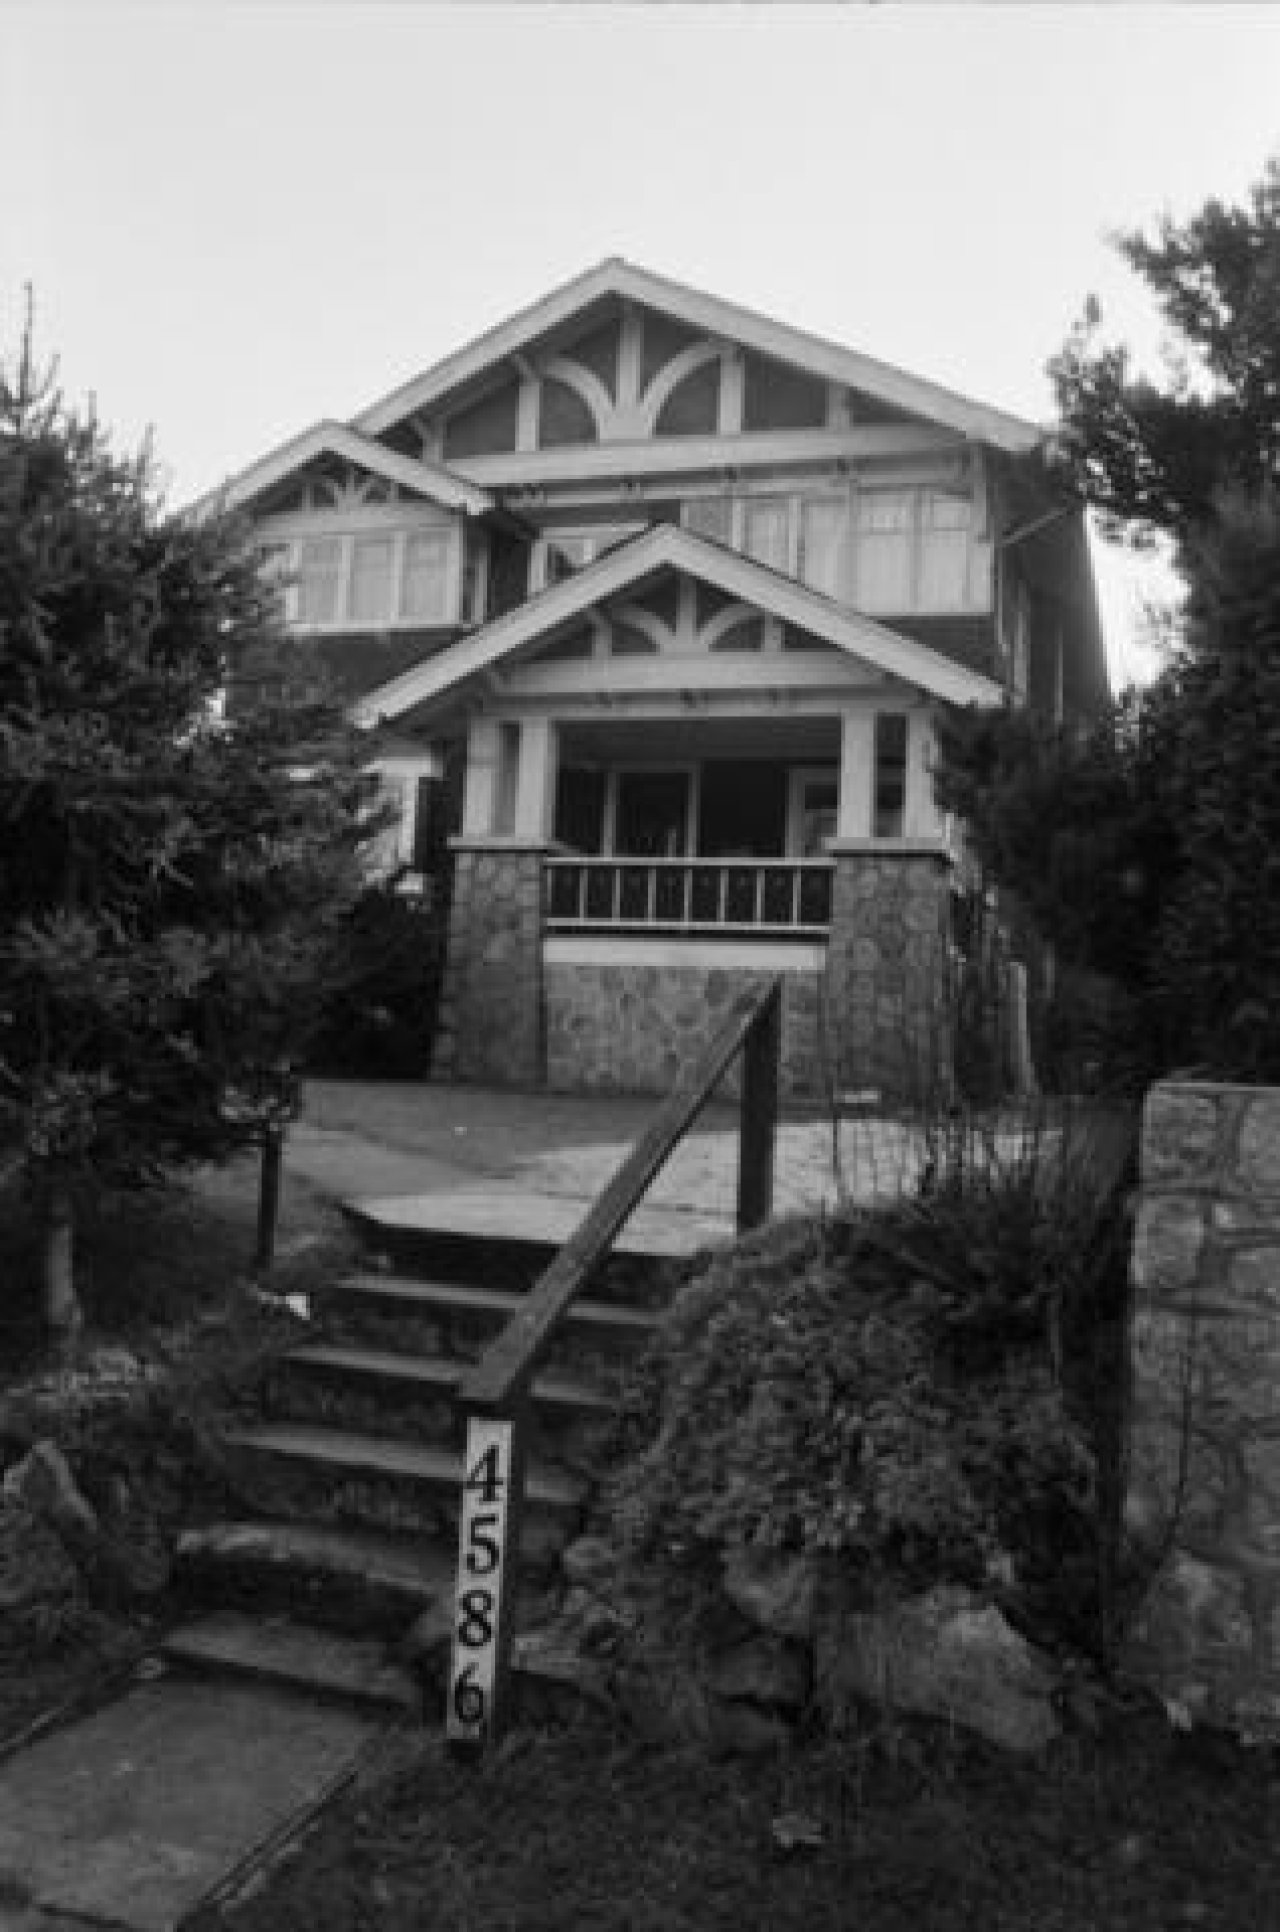 Photo of 4586 W 6th in the 1980s from the City of Vancouver Archives, CVA 790-1946_141.